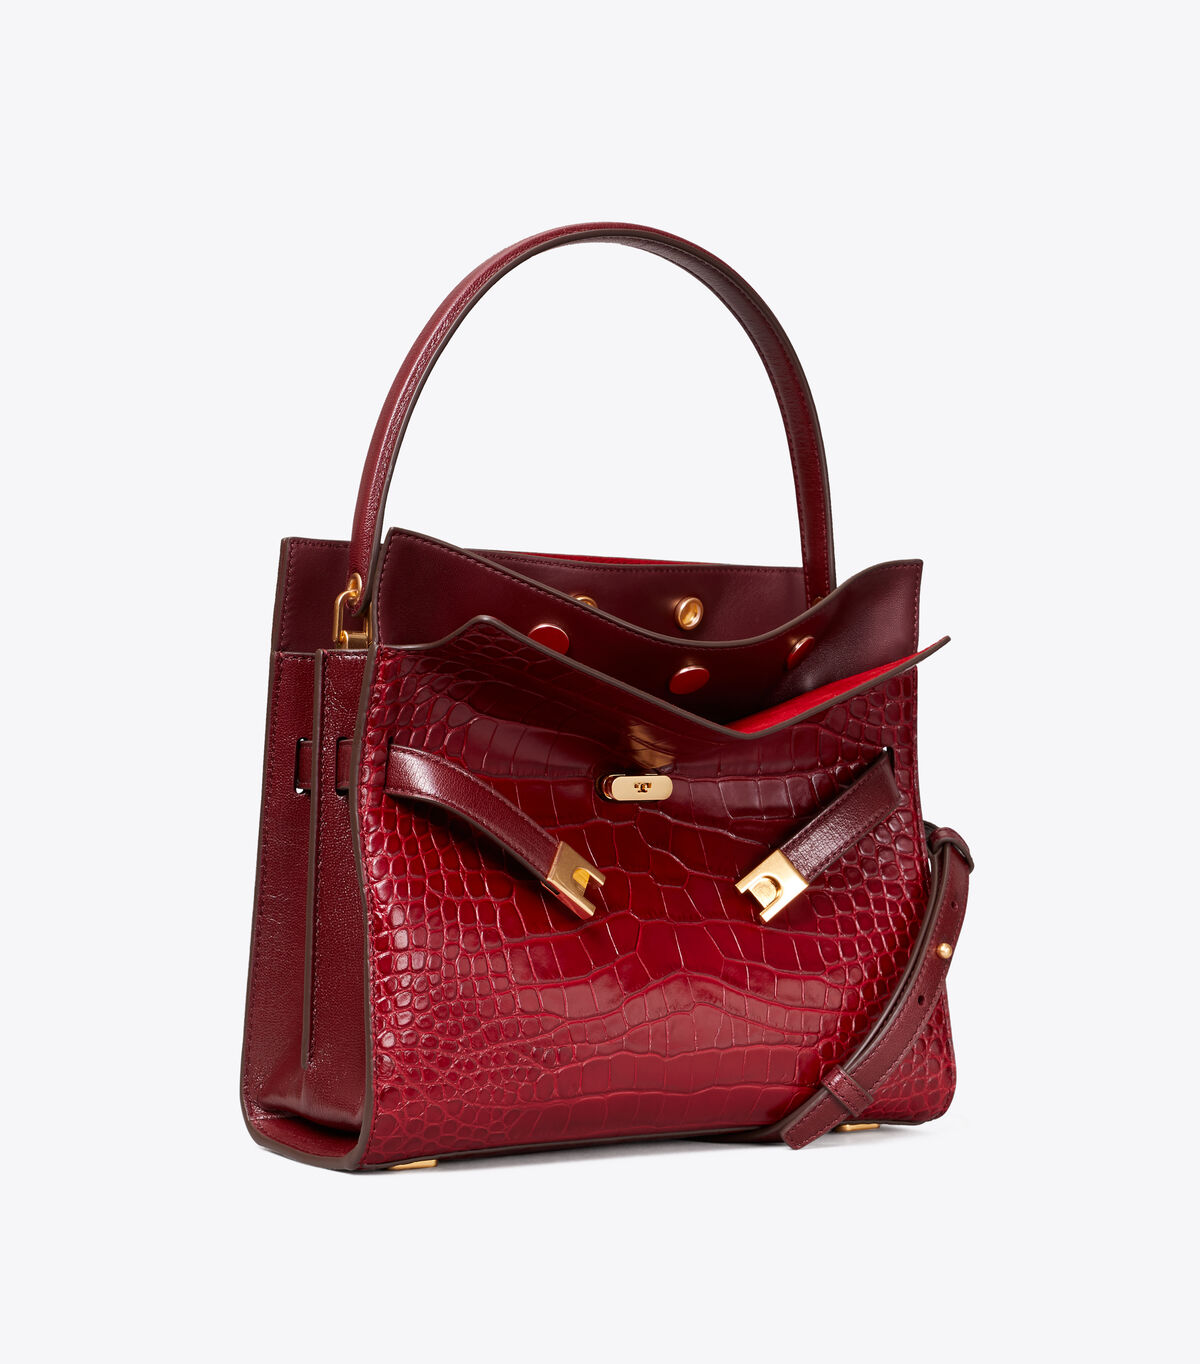 LEE RADZIWILL EMBOSSED SMALL DOUBLE BAG